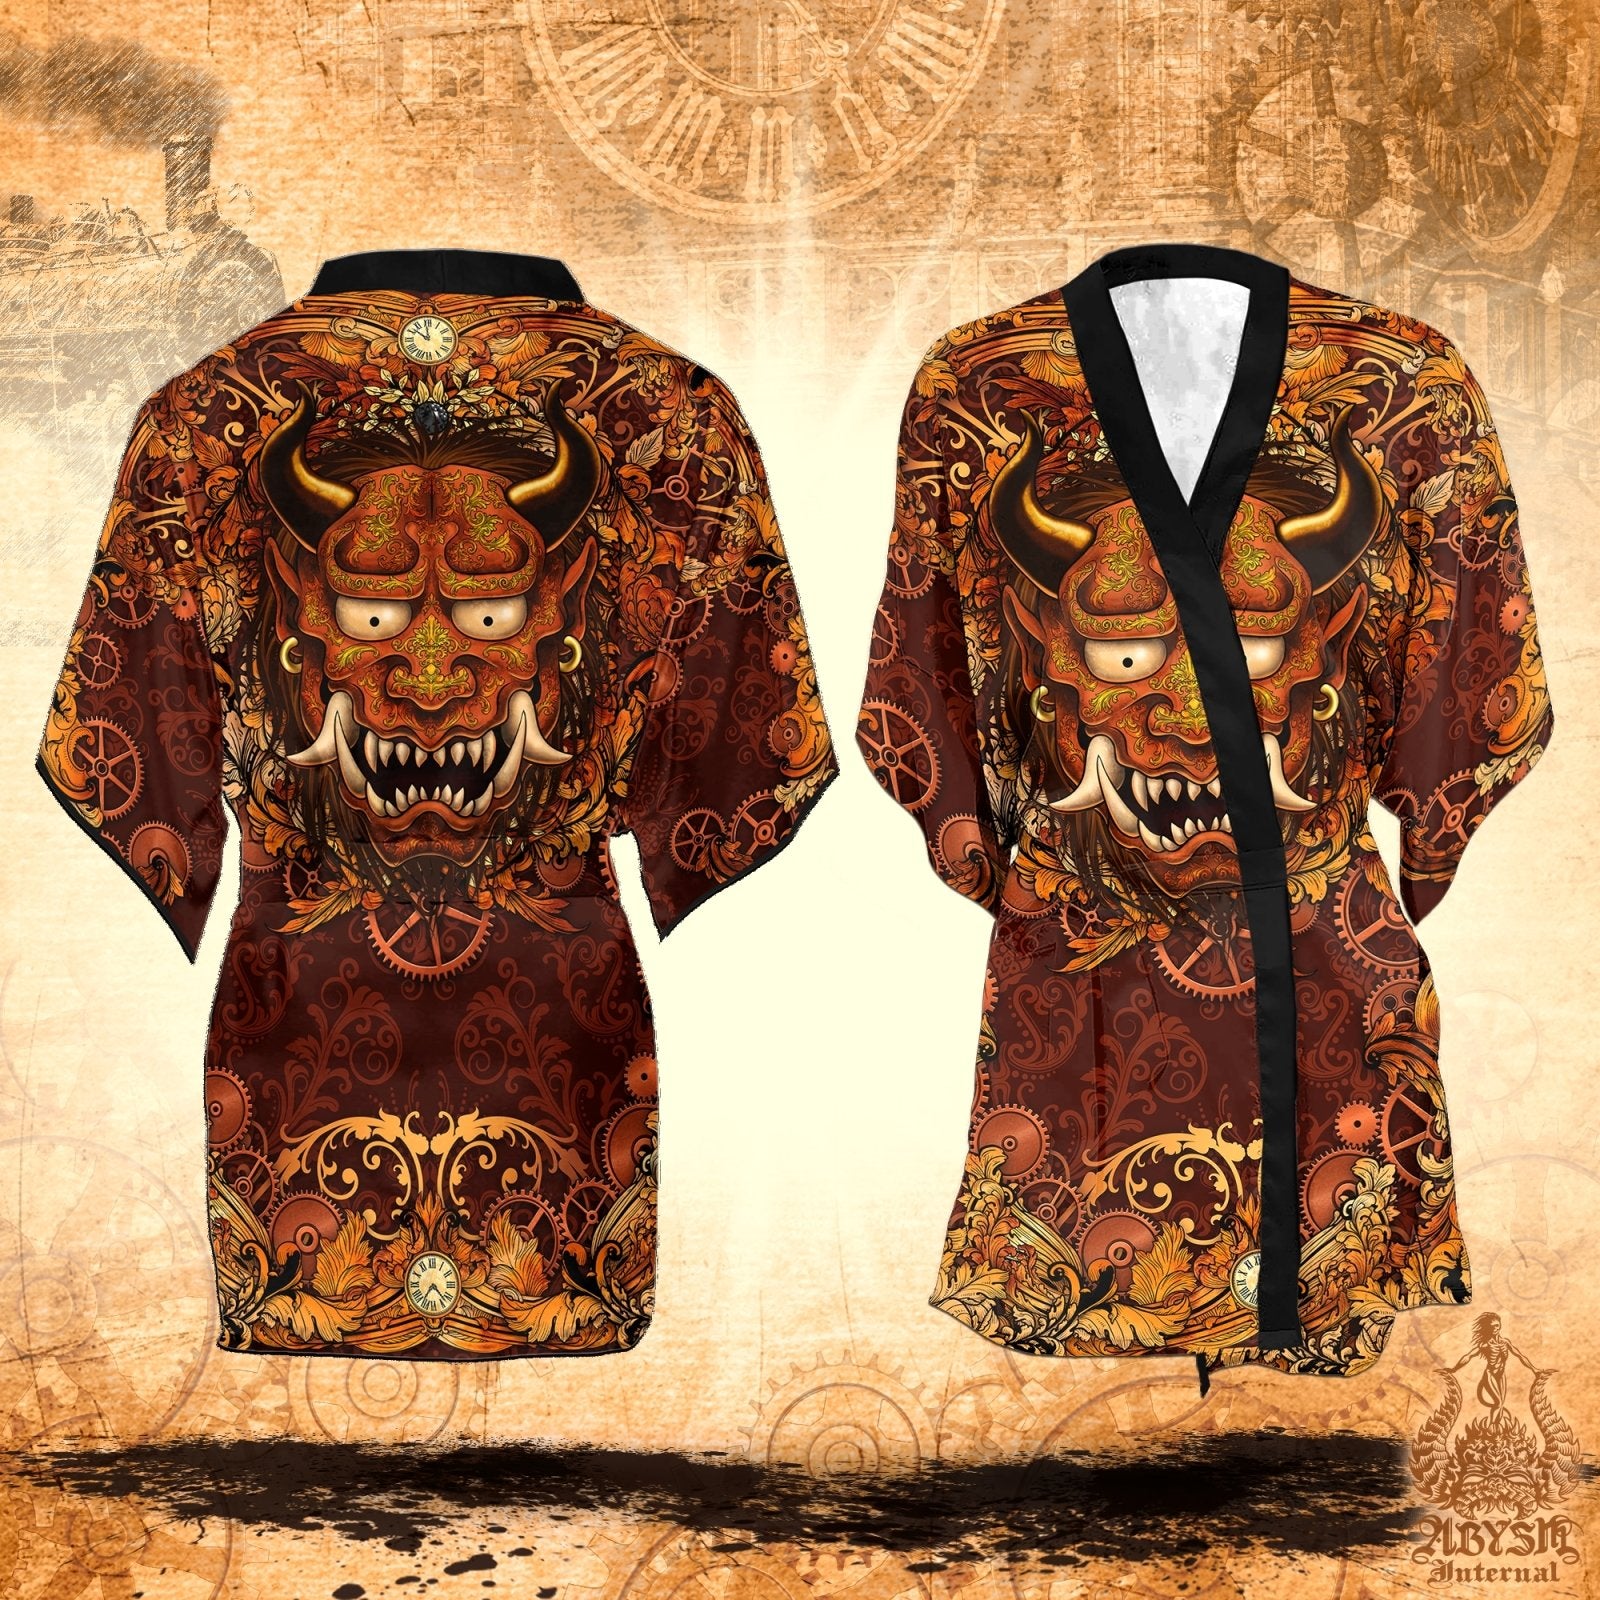 Demon Cover Up, Beach Outfit, Oni Party Kimono, Japanese Summer Festival Robe, Indie and Alternative Clothing, Unisex - Steampunk - Abysm Internal